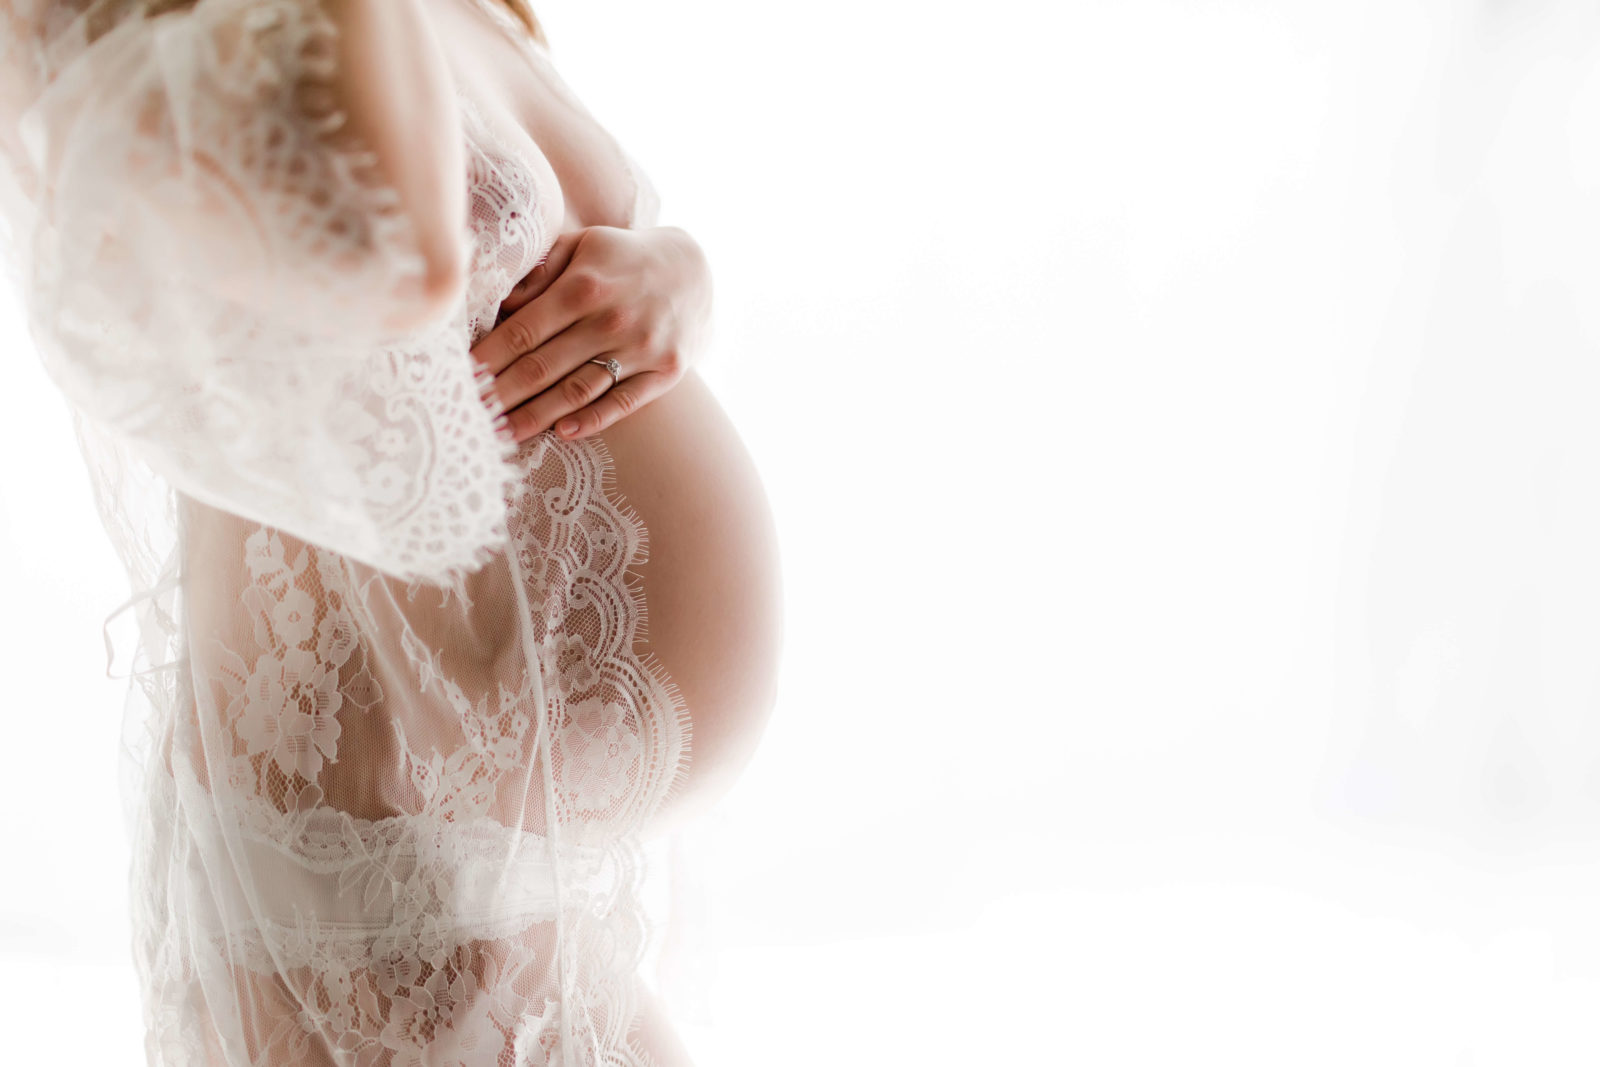 woman in lace robe holing on to pregnant belly during bare belly portraits